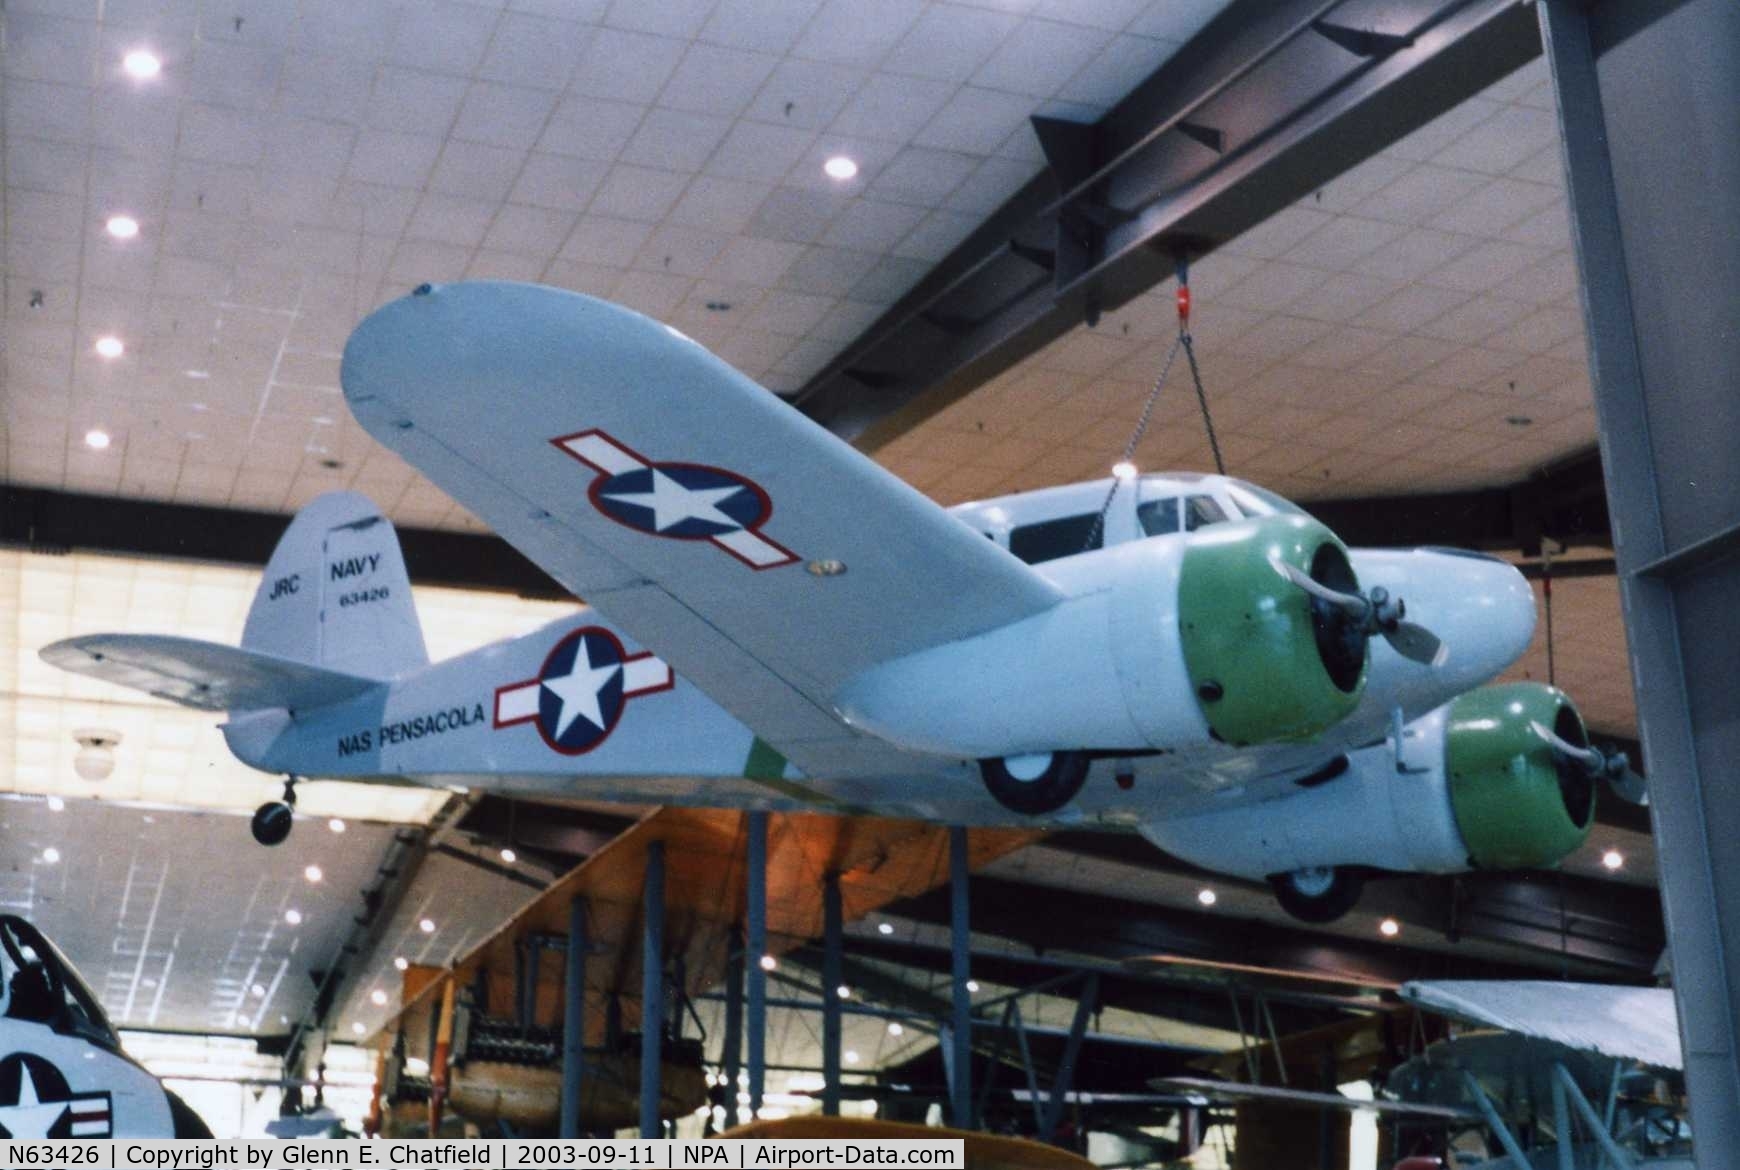 N63426, 1943 Cessna JRC-1 (UC-78) C/N 5515, UC-78B 43-7995 painted as JRC-1 at the National Museum of Naval Aviation